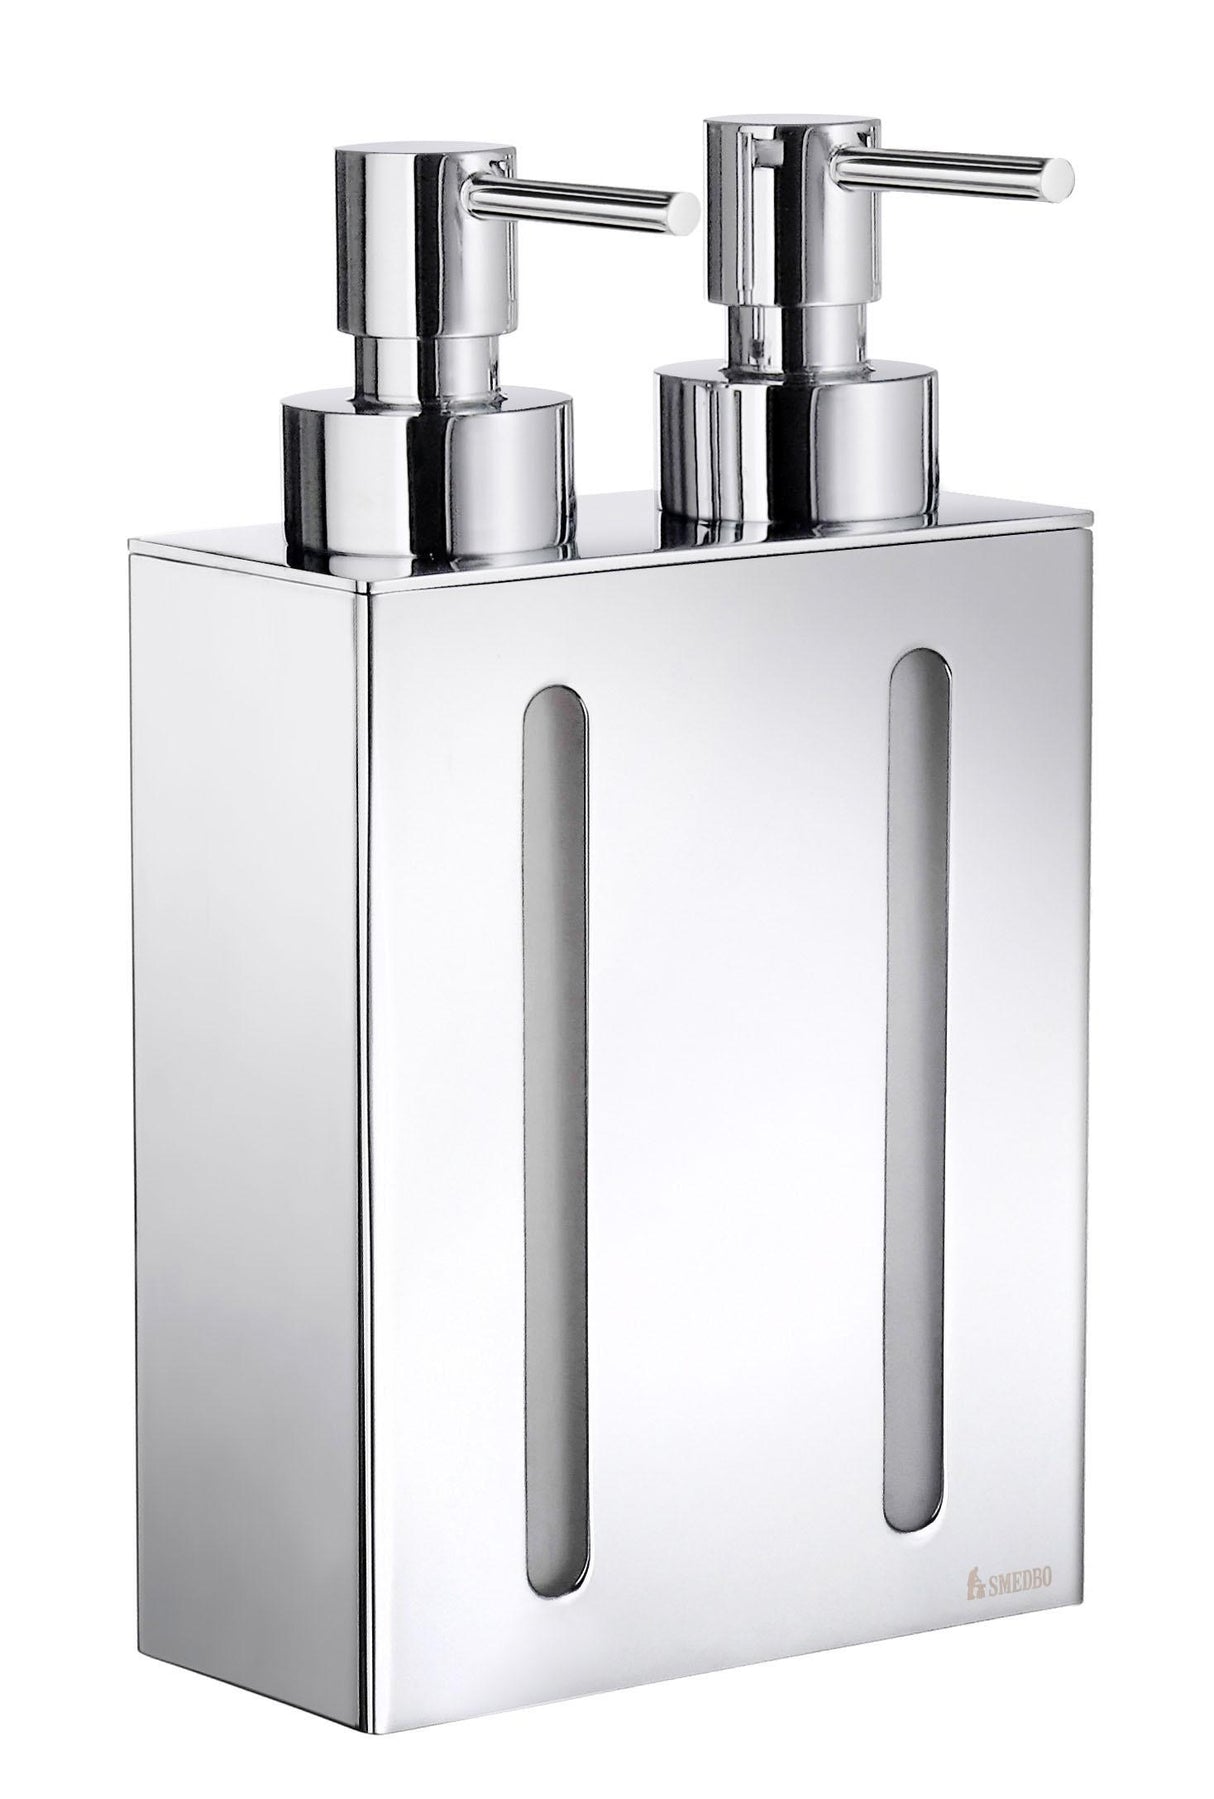 Smedbo Outline Soap Dispenser 2 container in Polished Chrome